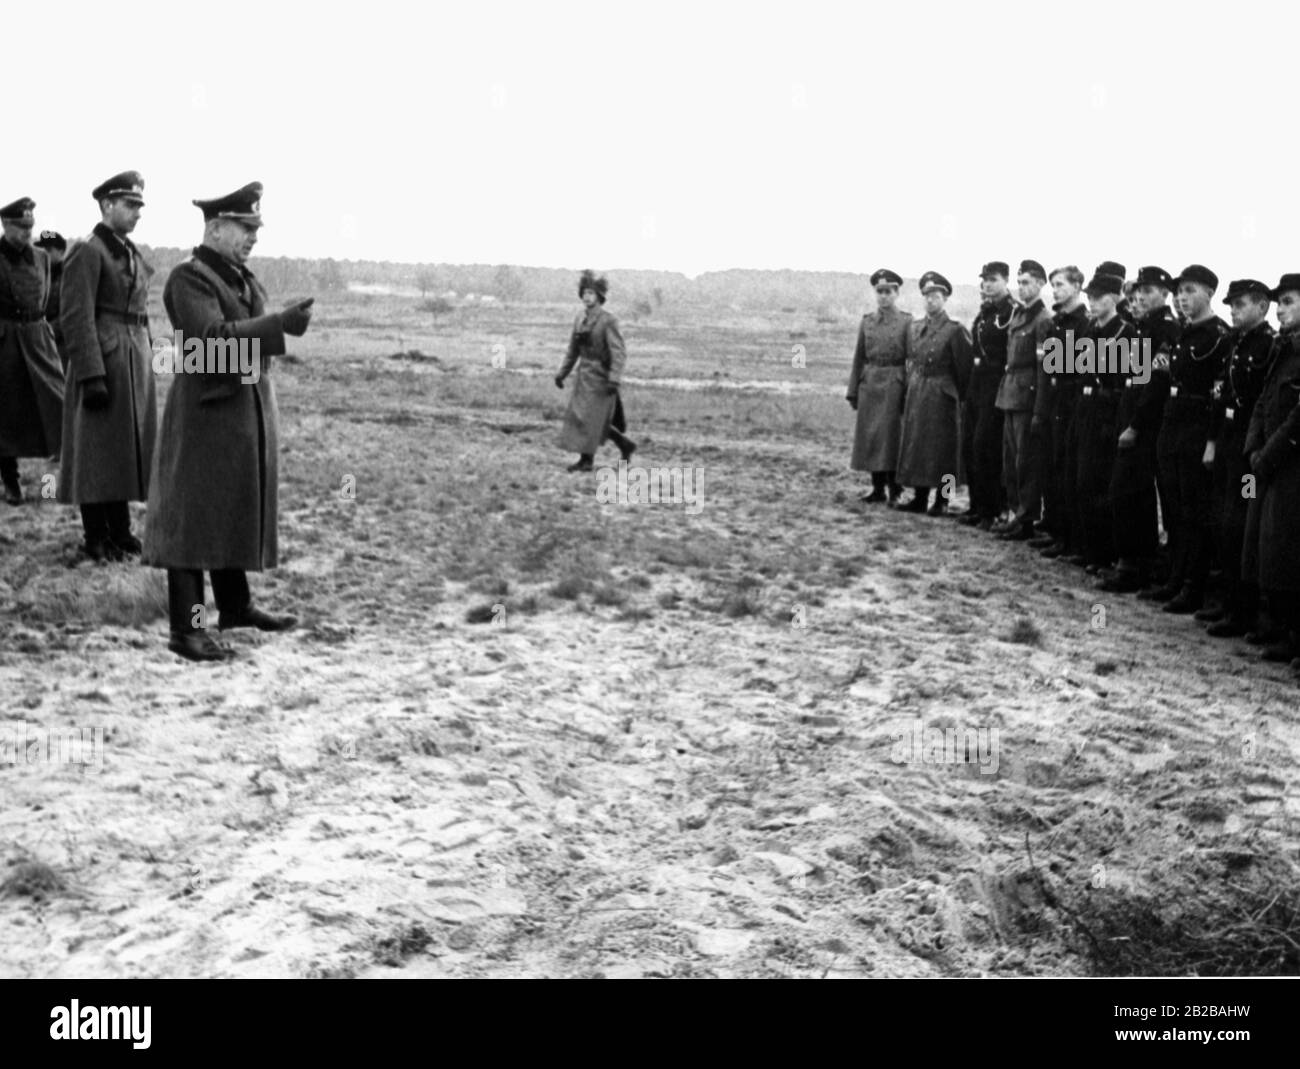 Colonel Walter Gorn, awarded with the Oakleaves with Swords to the Knight's Cross of the Iron Cross, speaks to a group of officer candidates. Stock Photo